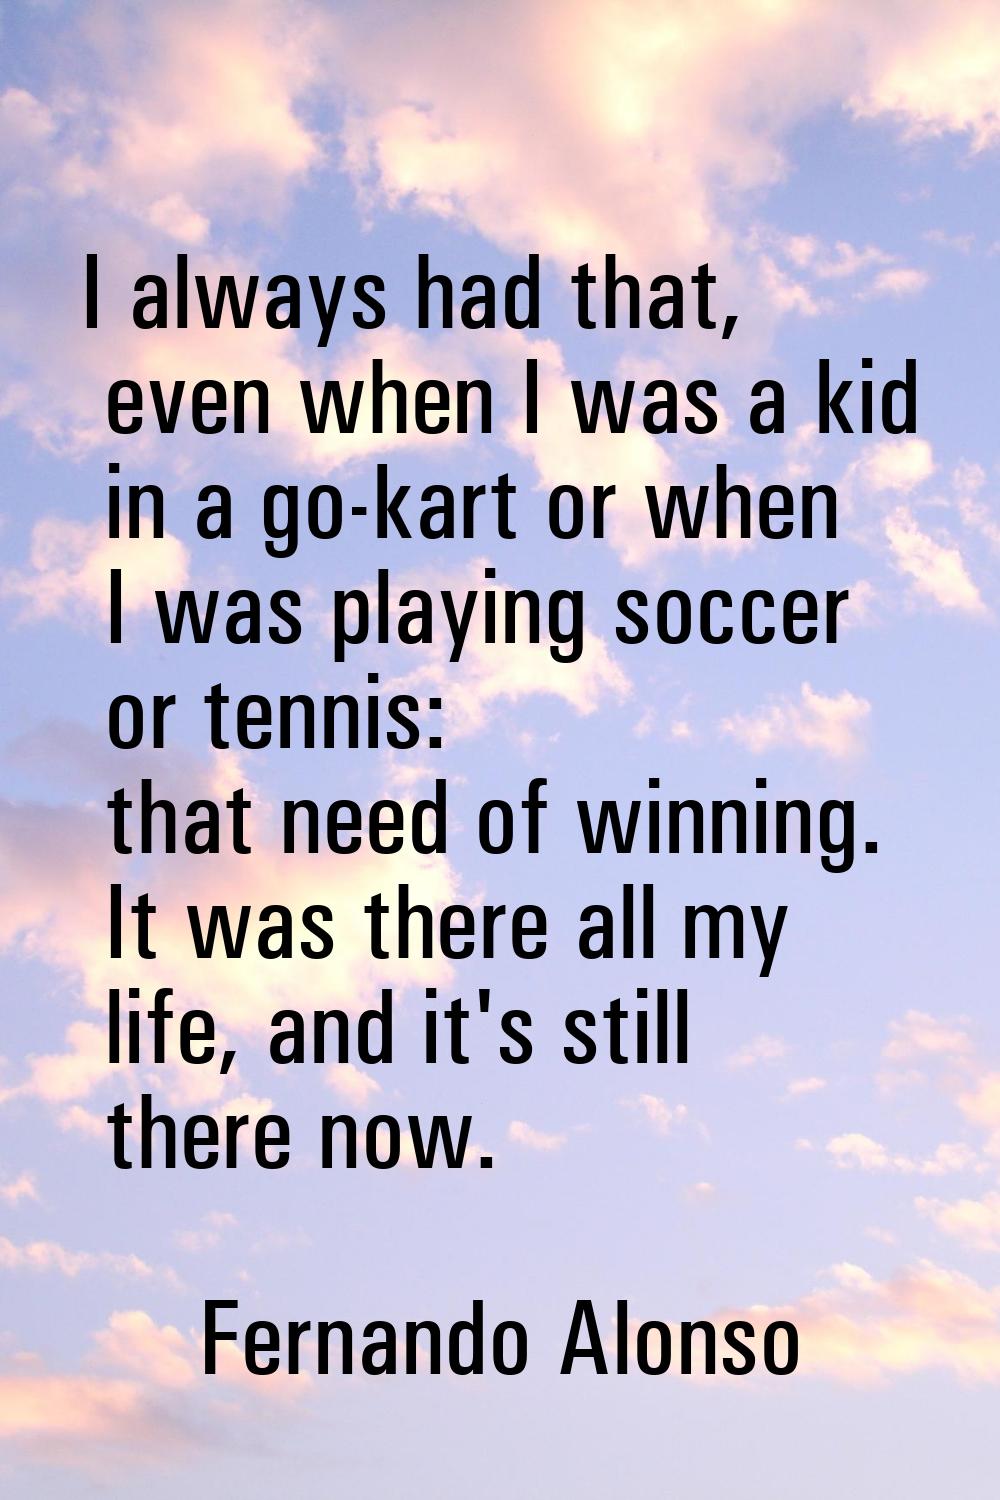 I always had that, even when I was a kid in a go-kart or when I was playing soccer or tennis: that 